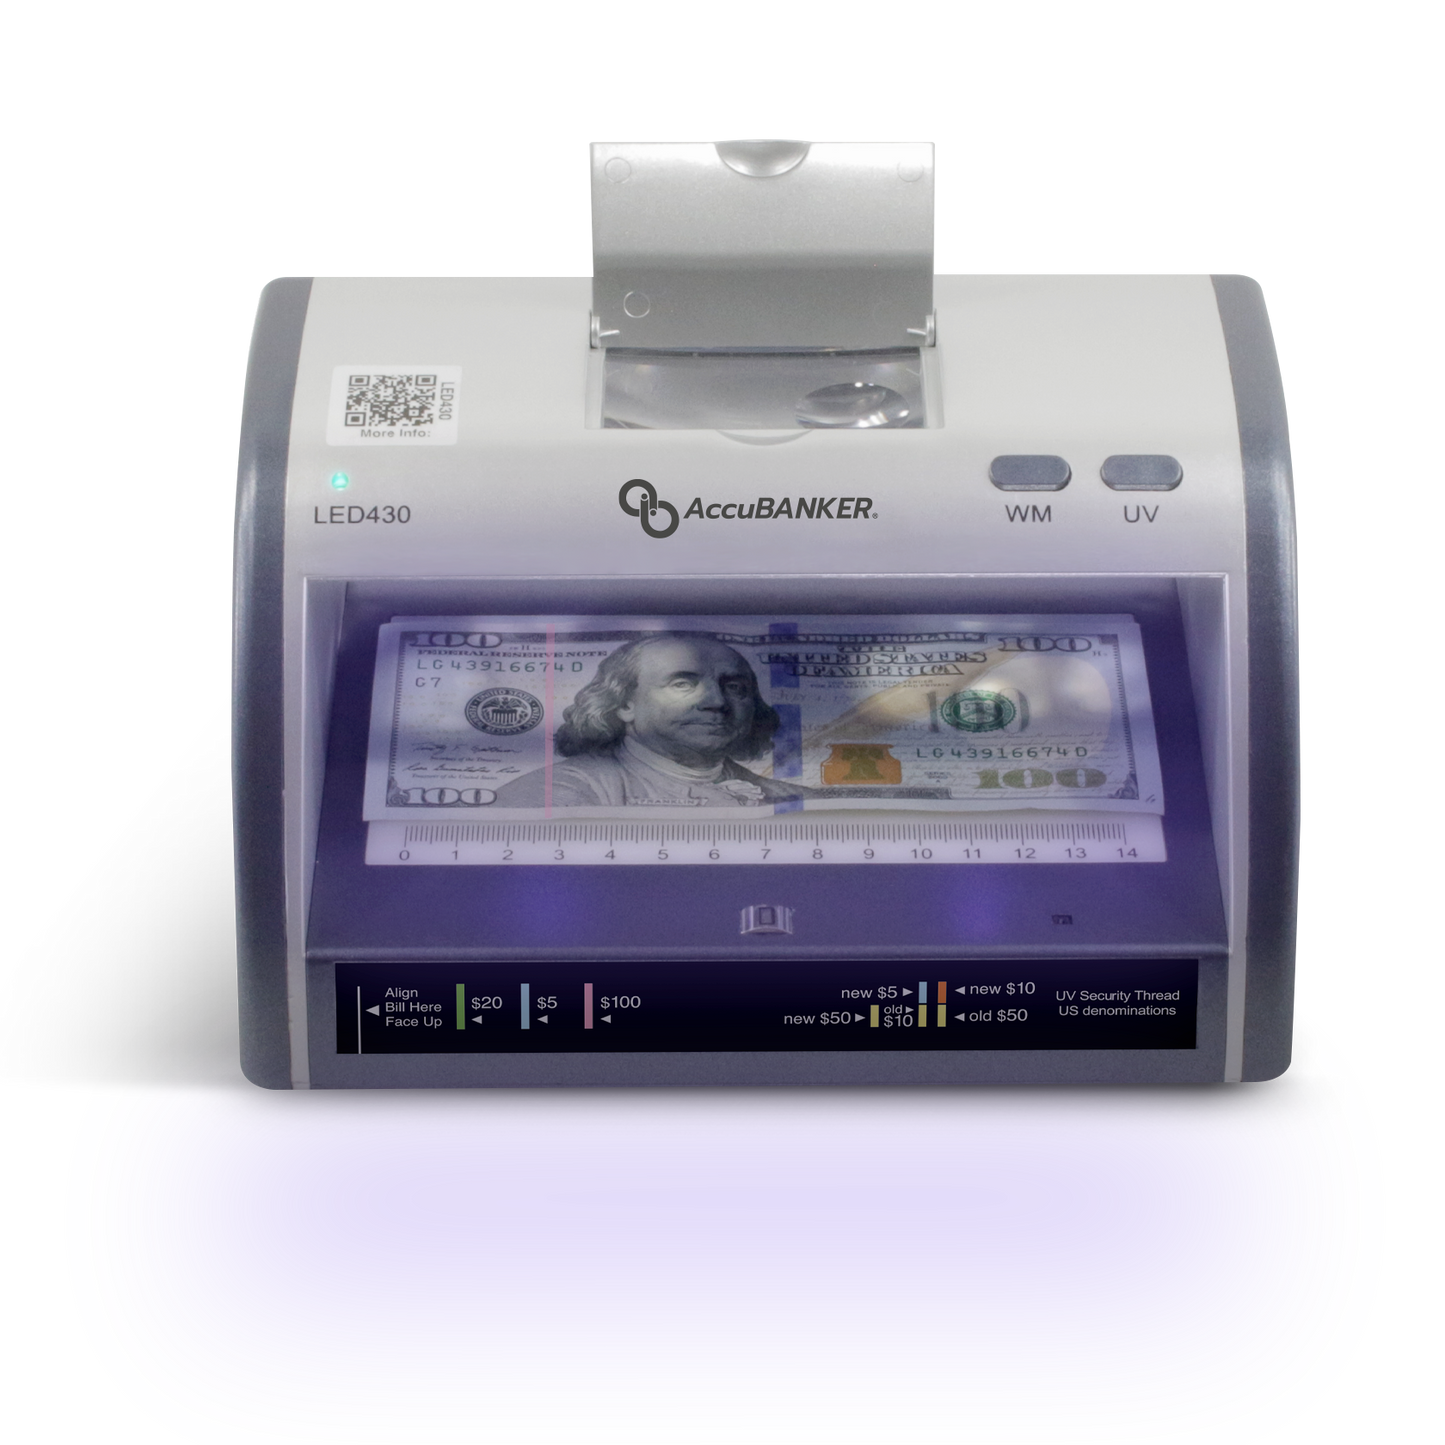 LED430 Counterfeit Bill/ Document Validator with Magnifier